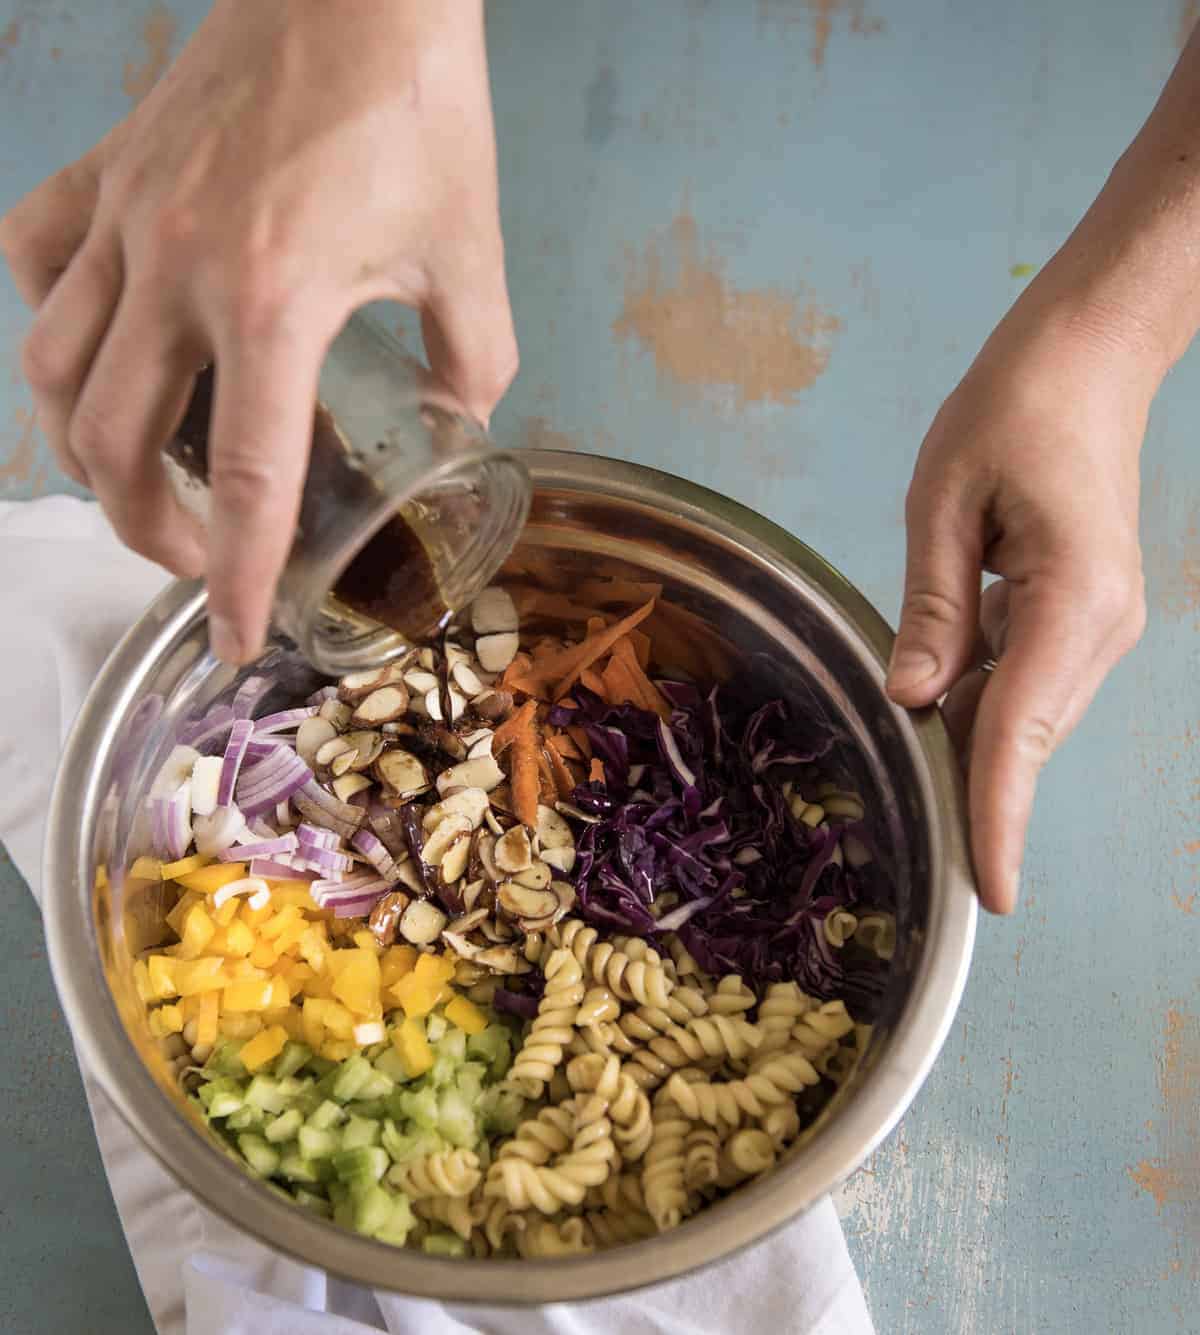 Asian Pasta Salad is made with chopped vegetables, pasta, a simple soy sauce dressing and it only takes about 20 minutes to make!